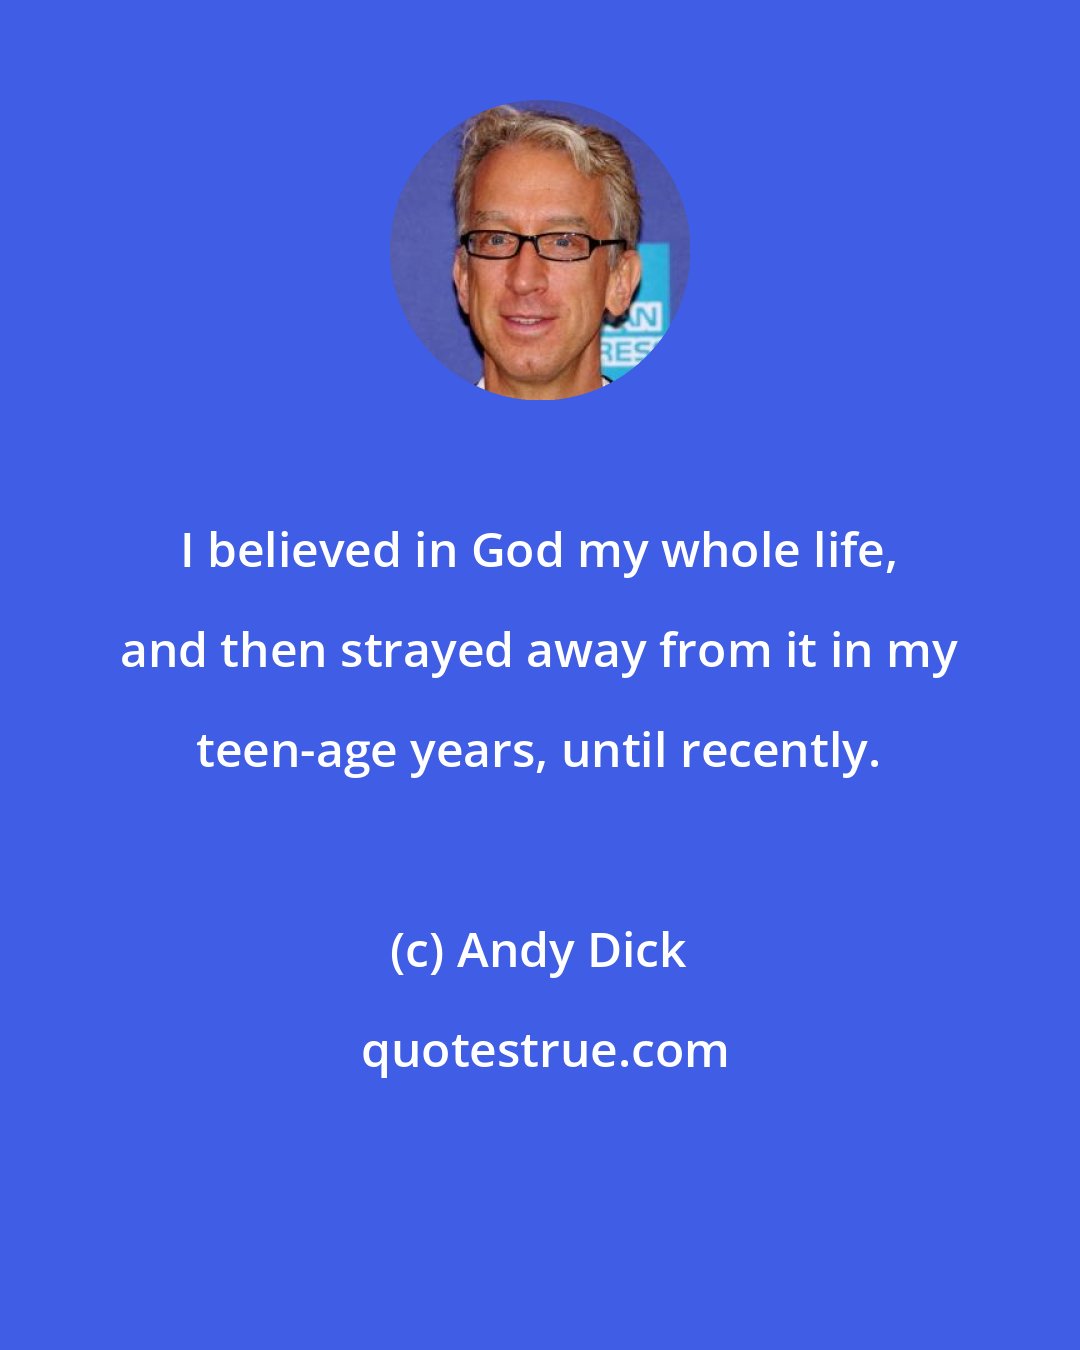 Andy Dick: I believed in God my whole life, and then strayed away from it in my teen-age years, until recently.